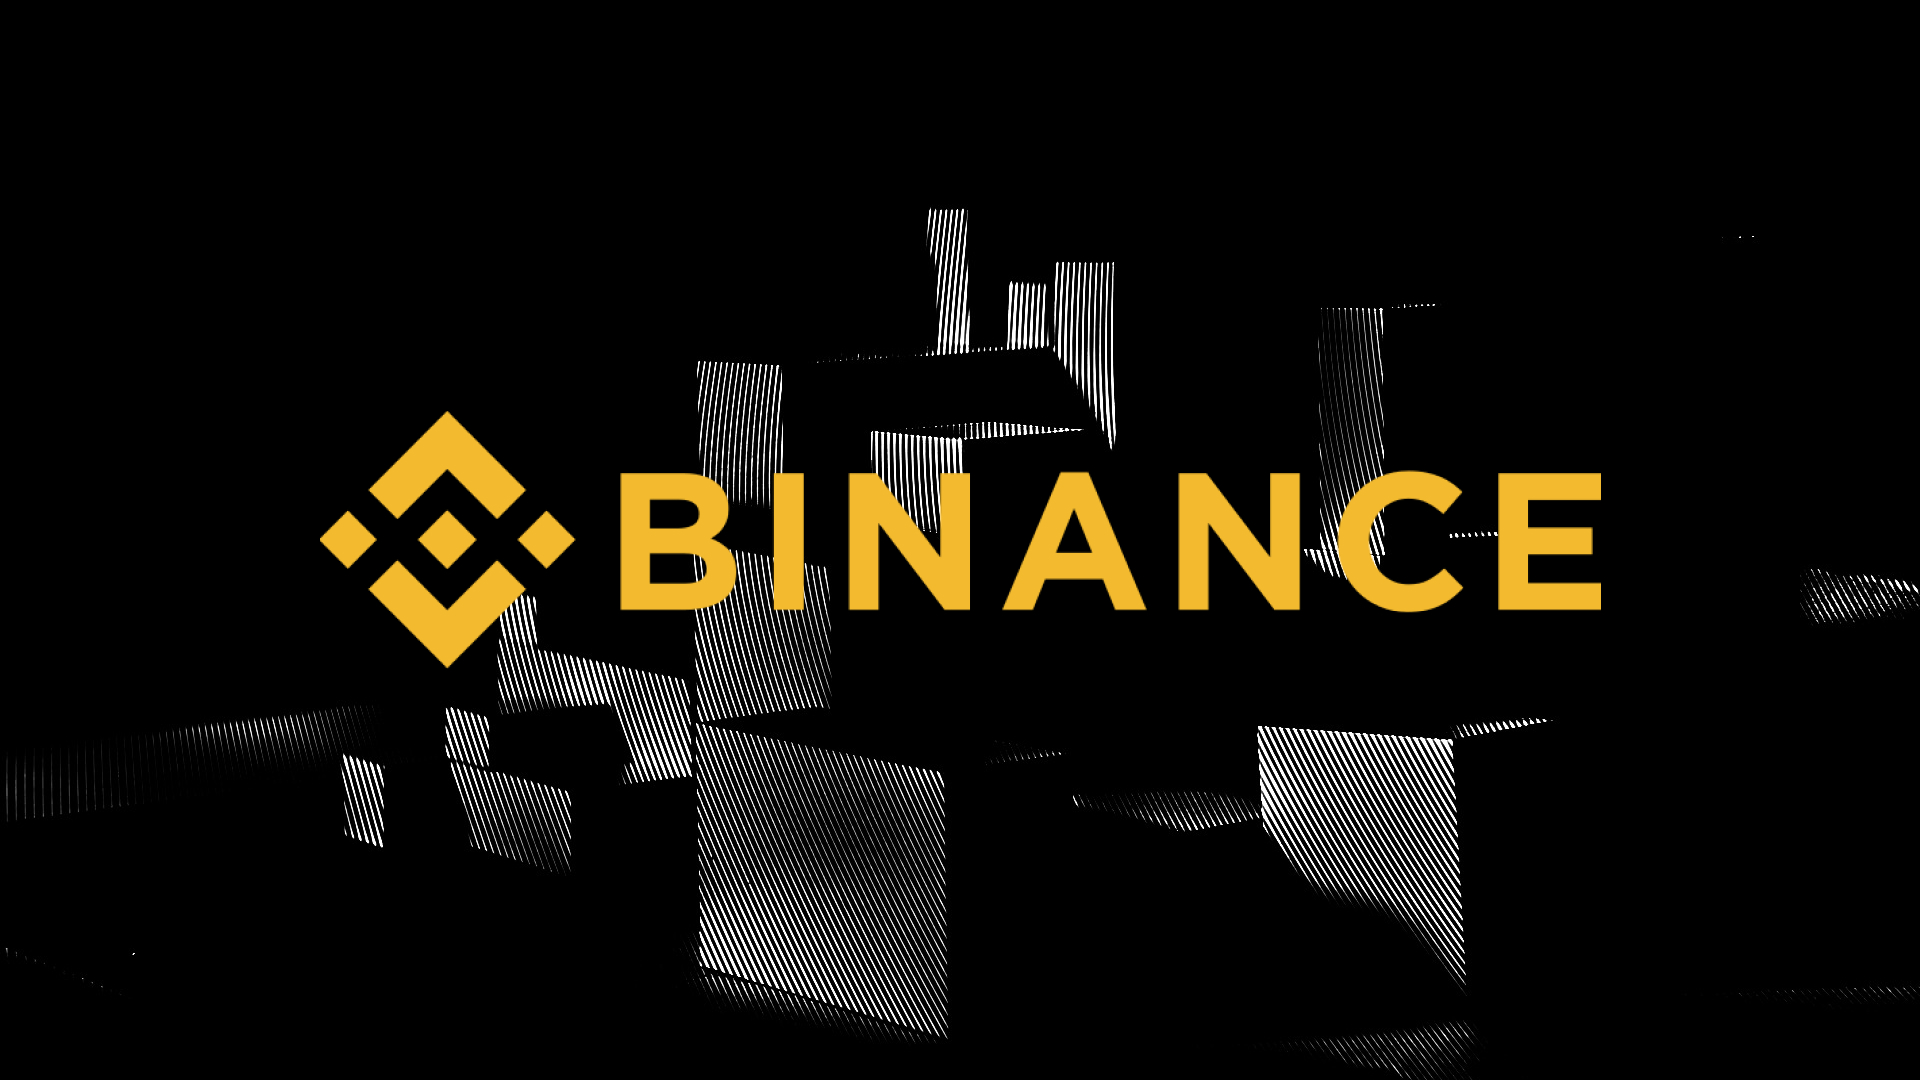 Binance Launches Bitcoin Cloud Mining Services